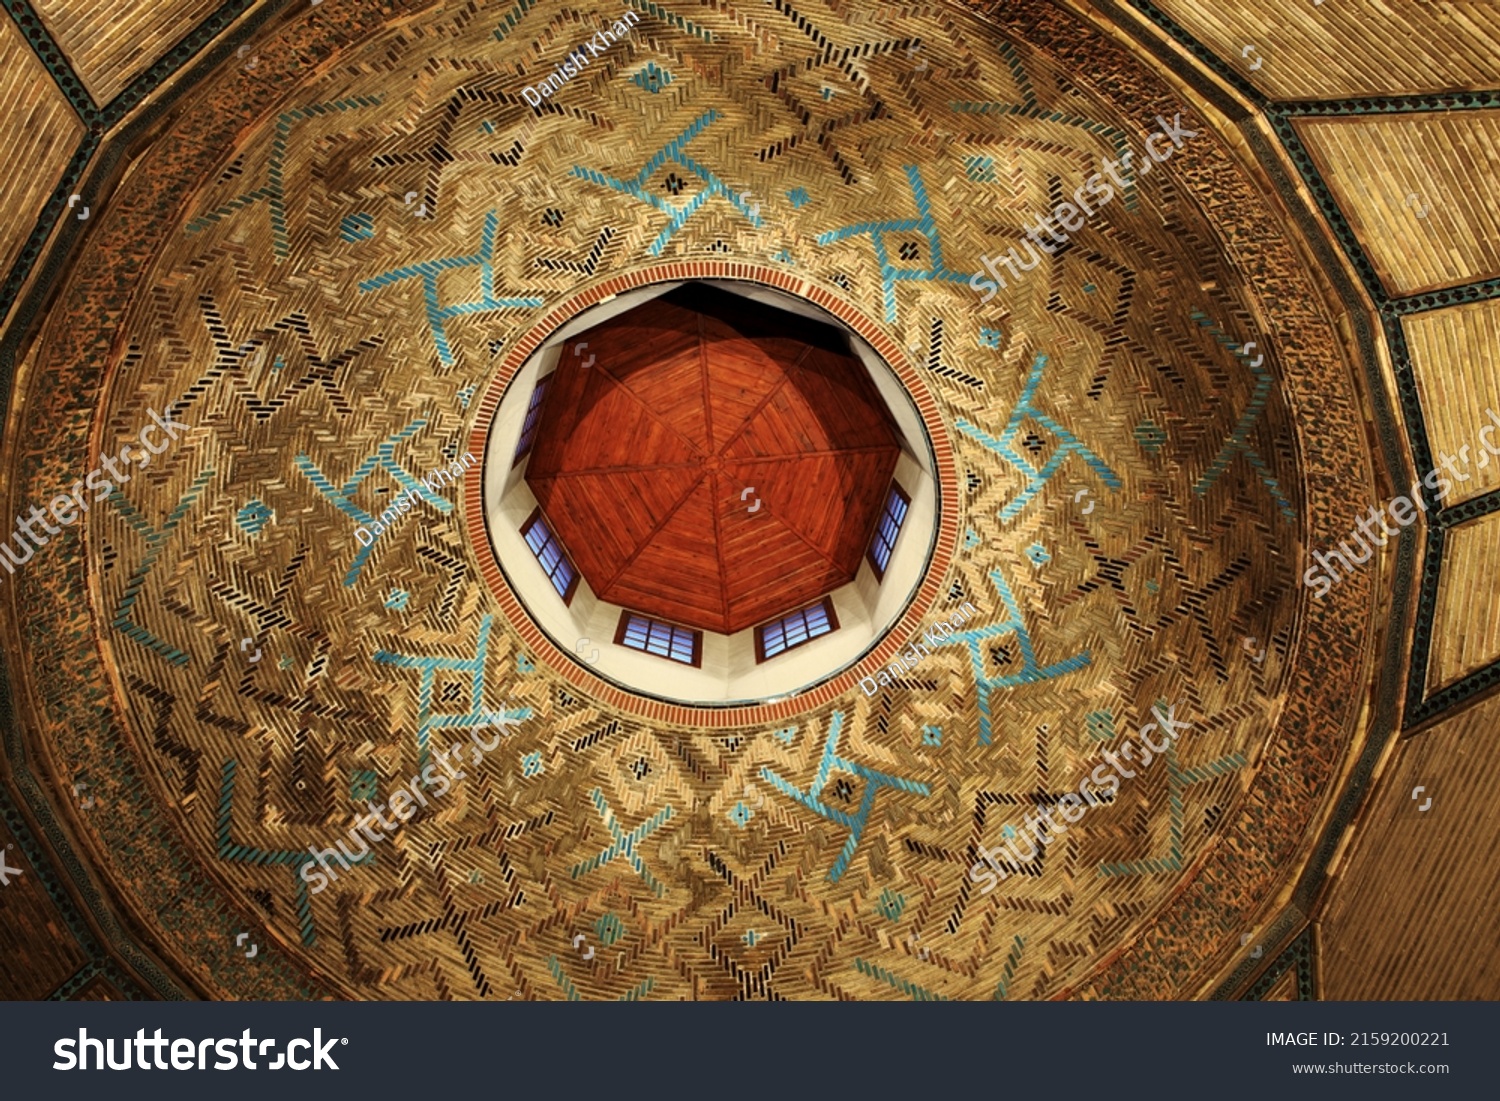 Interior design of dome in Ince Minare Medrese or Seminary of the Slender Minaret, (built 1267) is among Konya's finest and most impressive Seljuk Turkish architectural masterpieces.  #2159200221